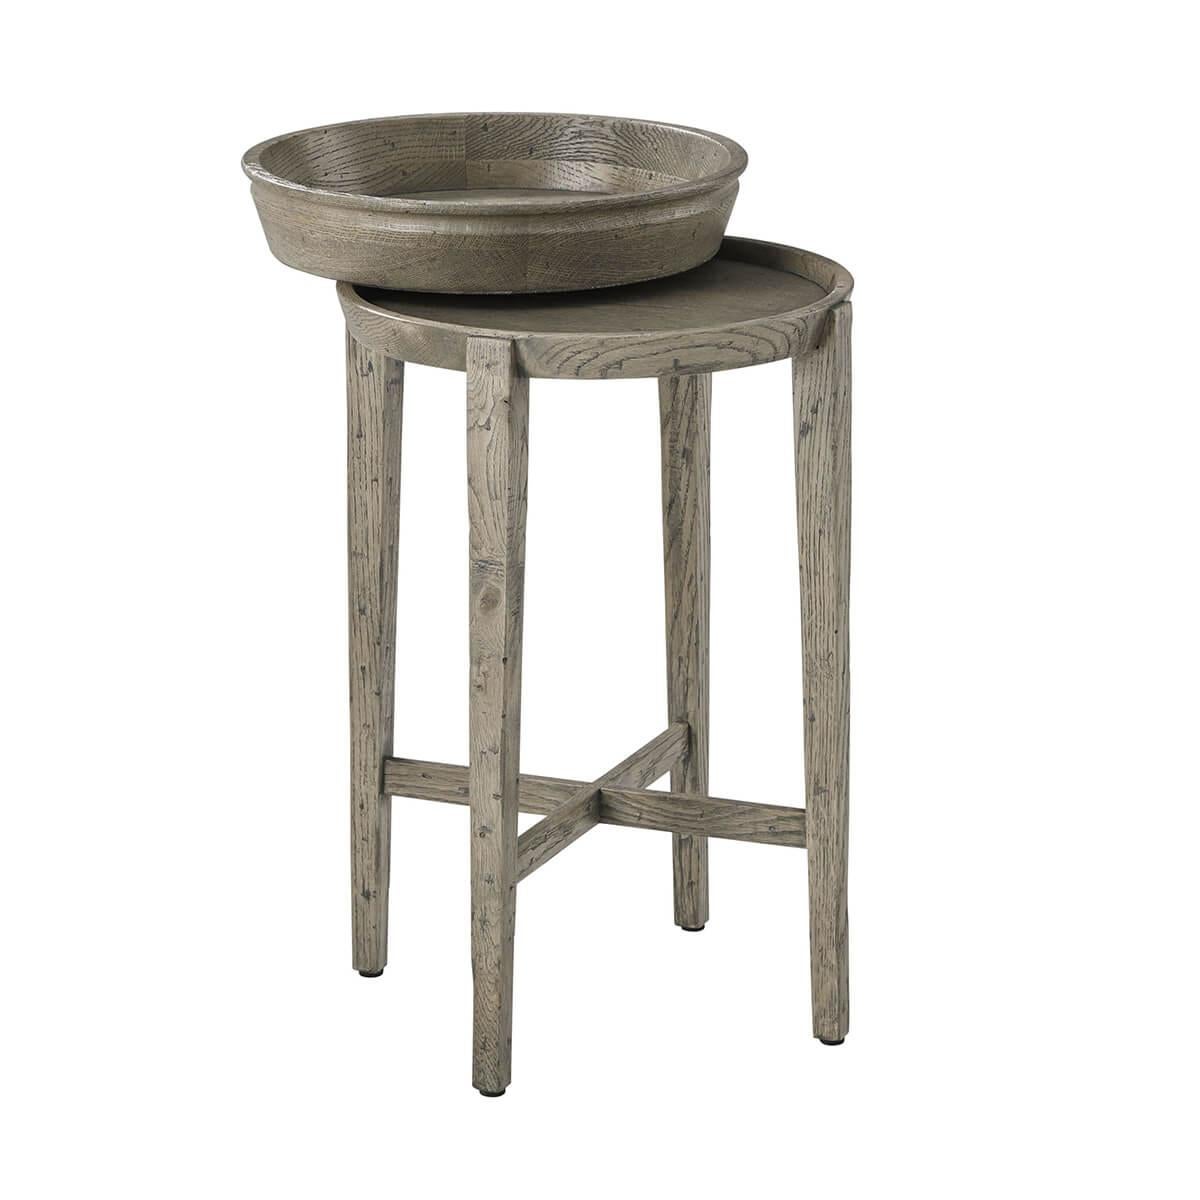 In a grey echo oak finish. The small round accent table has a removable bowl form tray top that sits on a base with four square tapered legs joined by an 